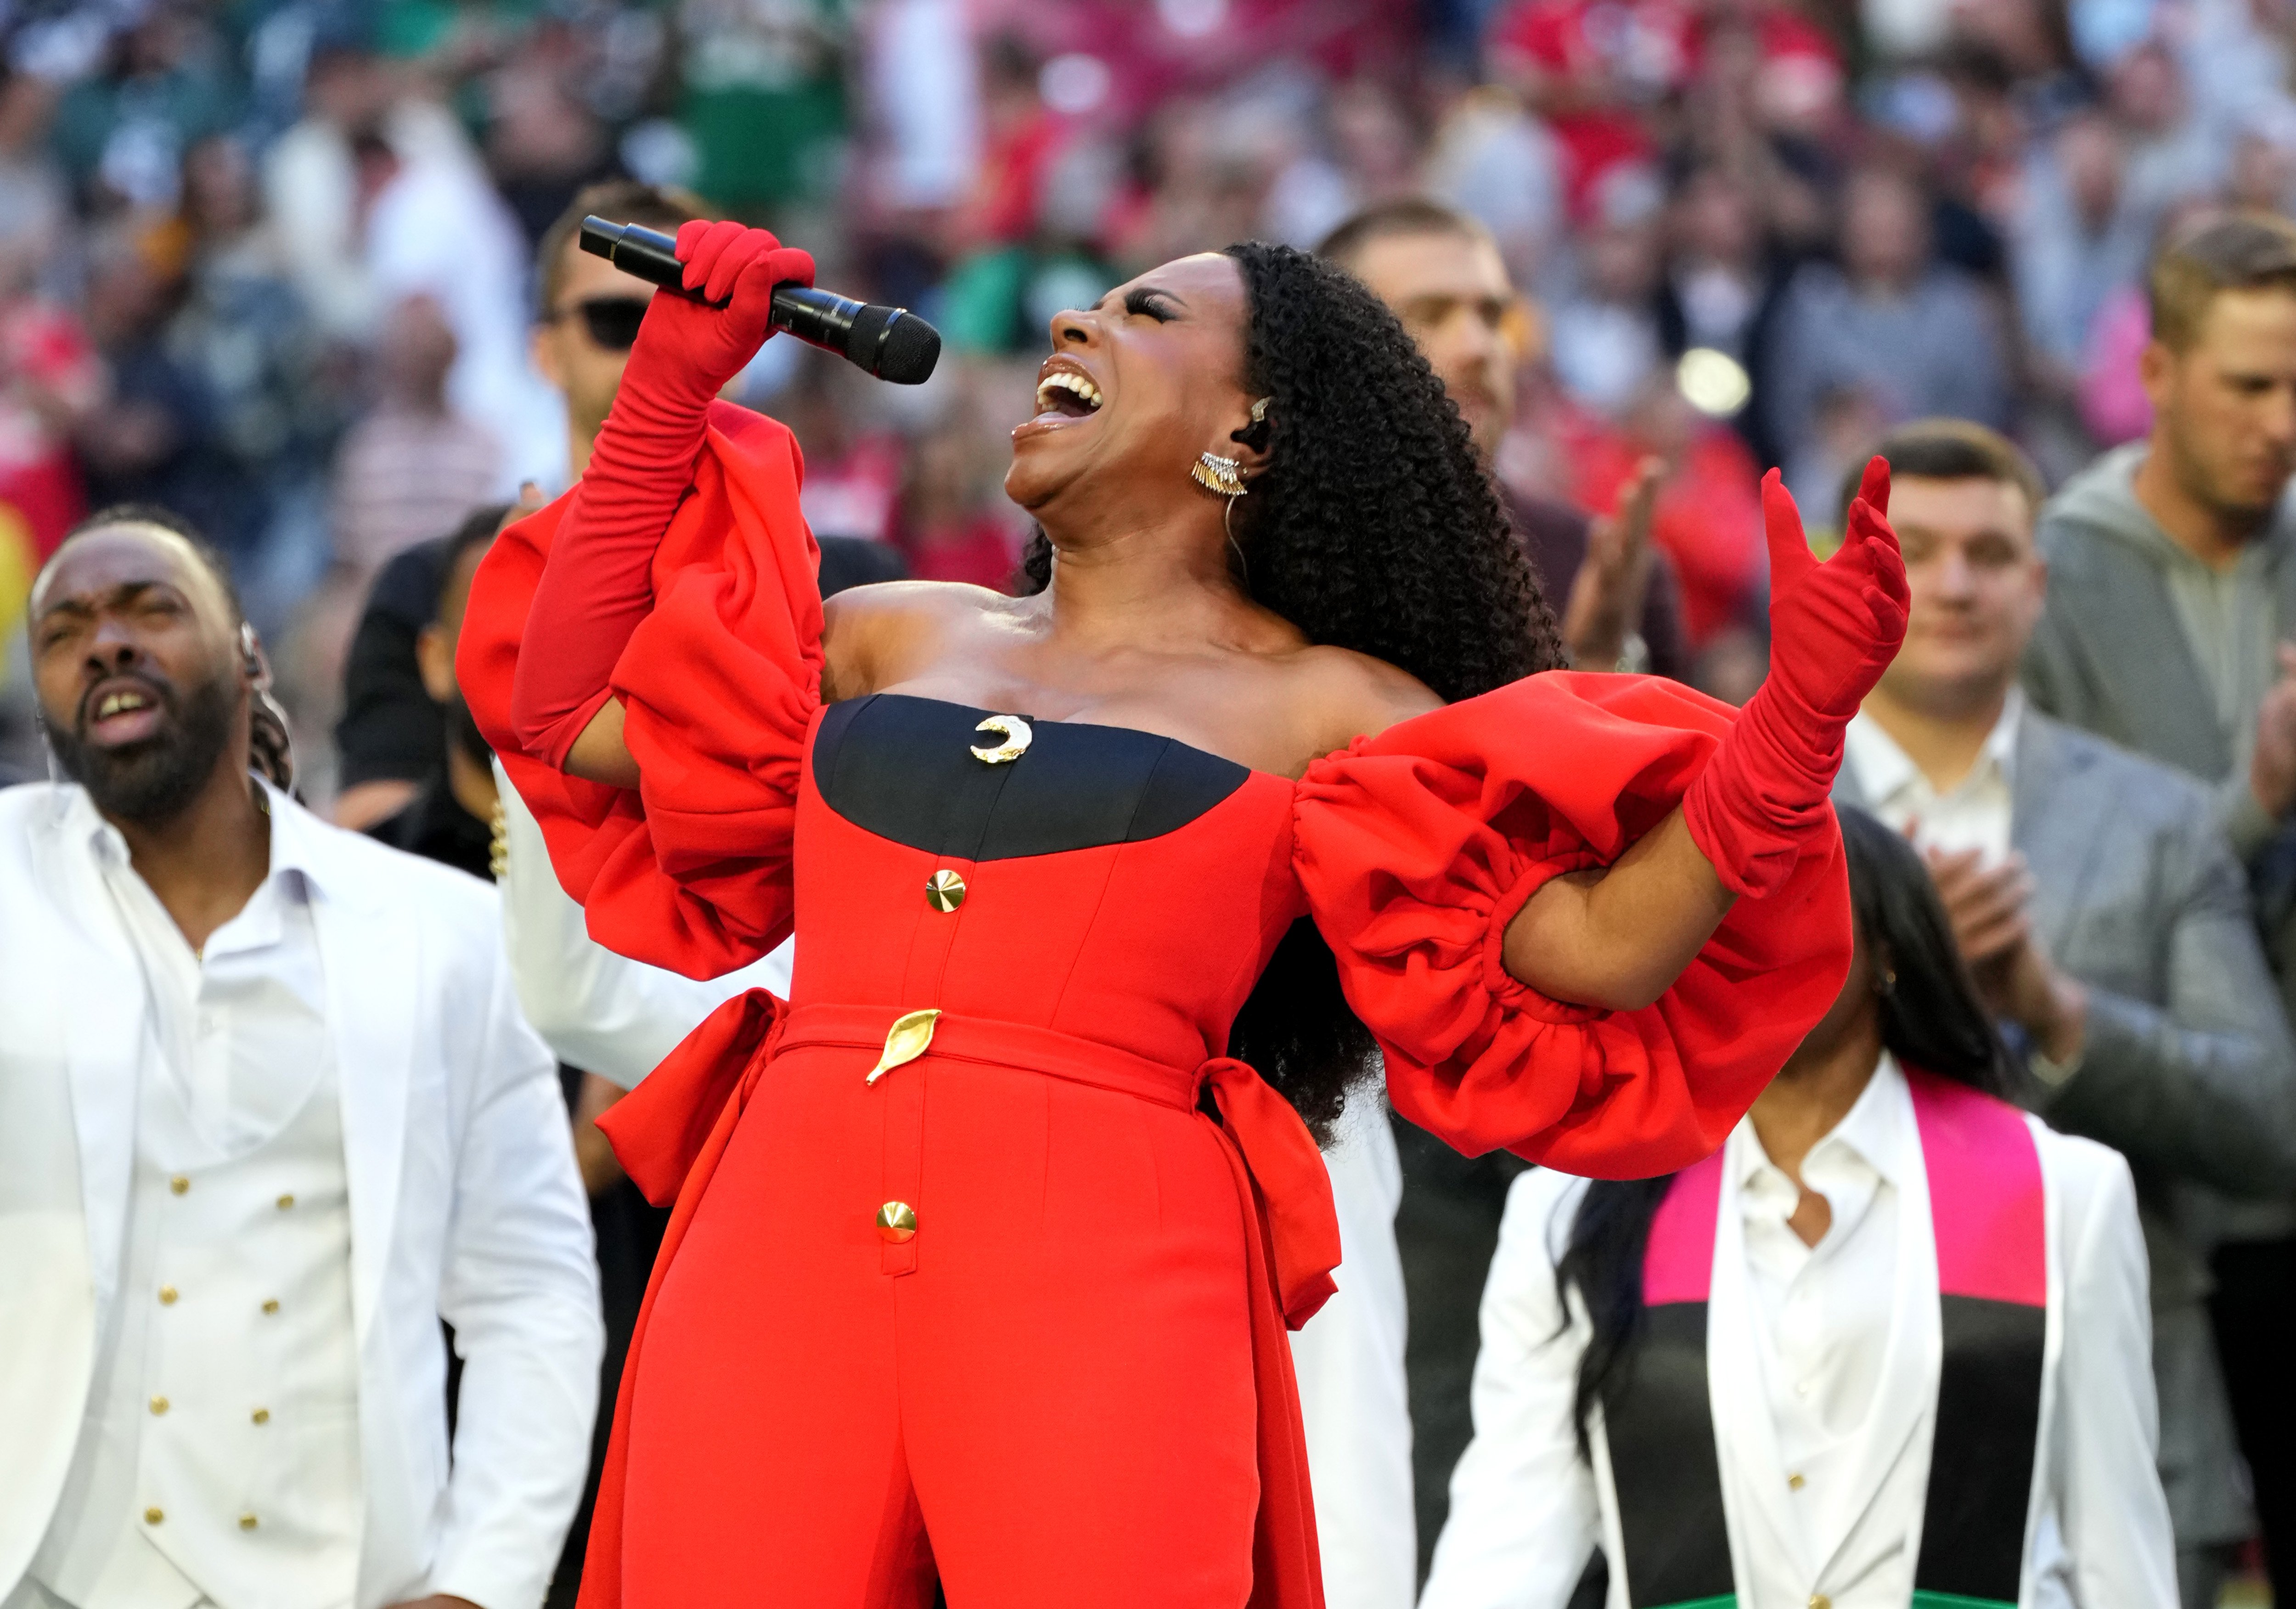 Sheryl Lee Ralph performs during Super Bowl LVII at State Farm Stadium, on February 12, 2023, in Glendale, Arizona. | Source: Getty Images